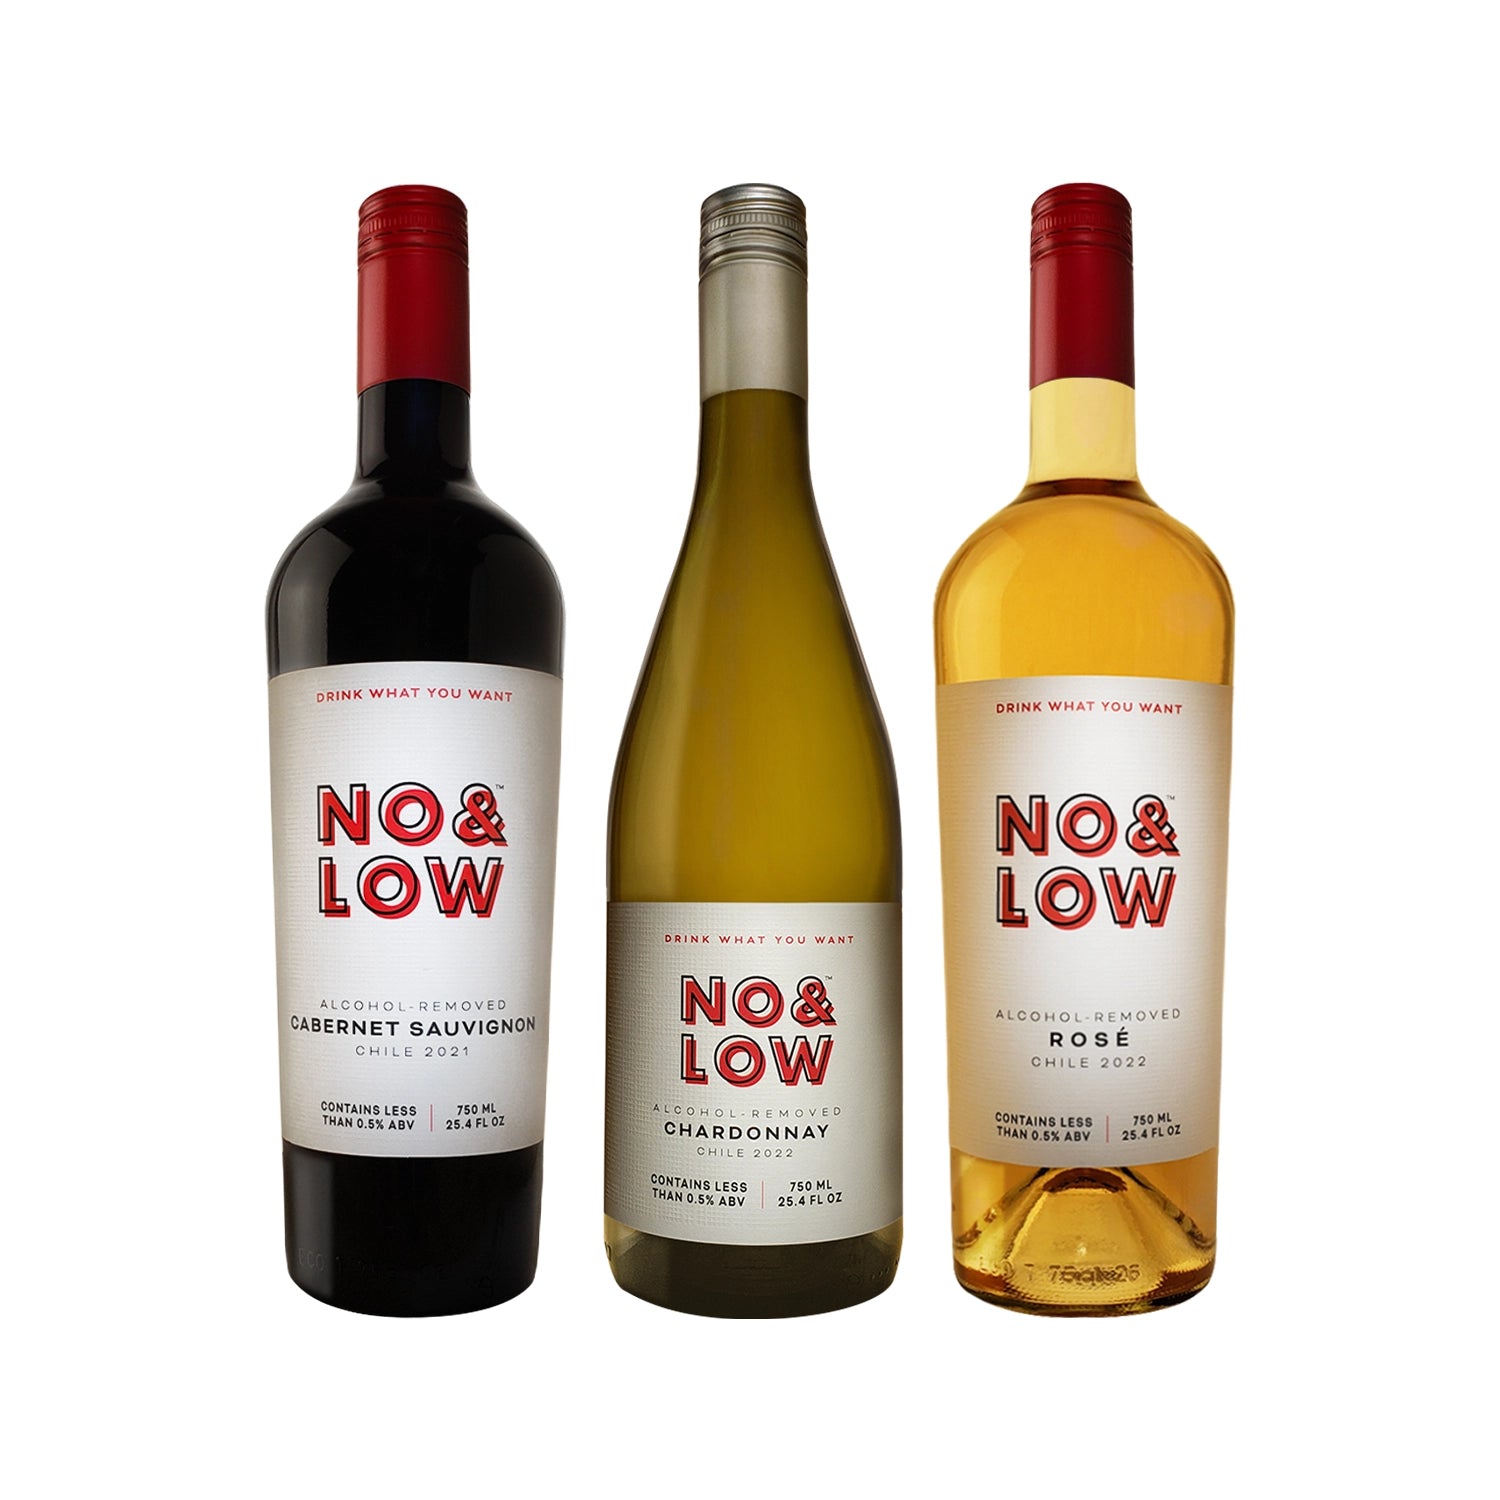 "Taste of Chile" - Best Non-Alcoholic Wines (3-Pack)